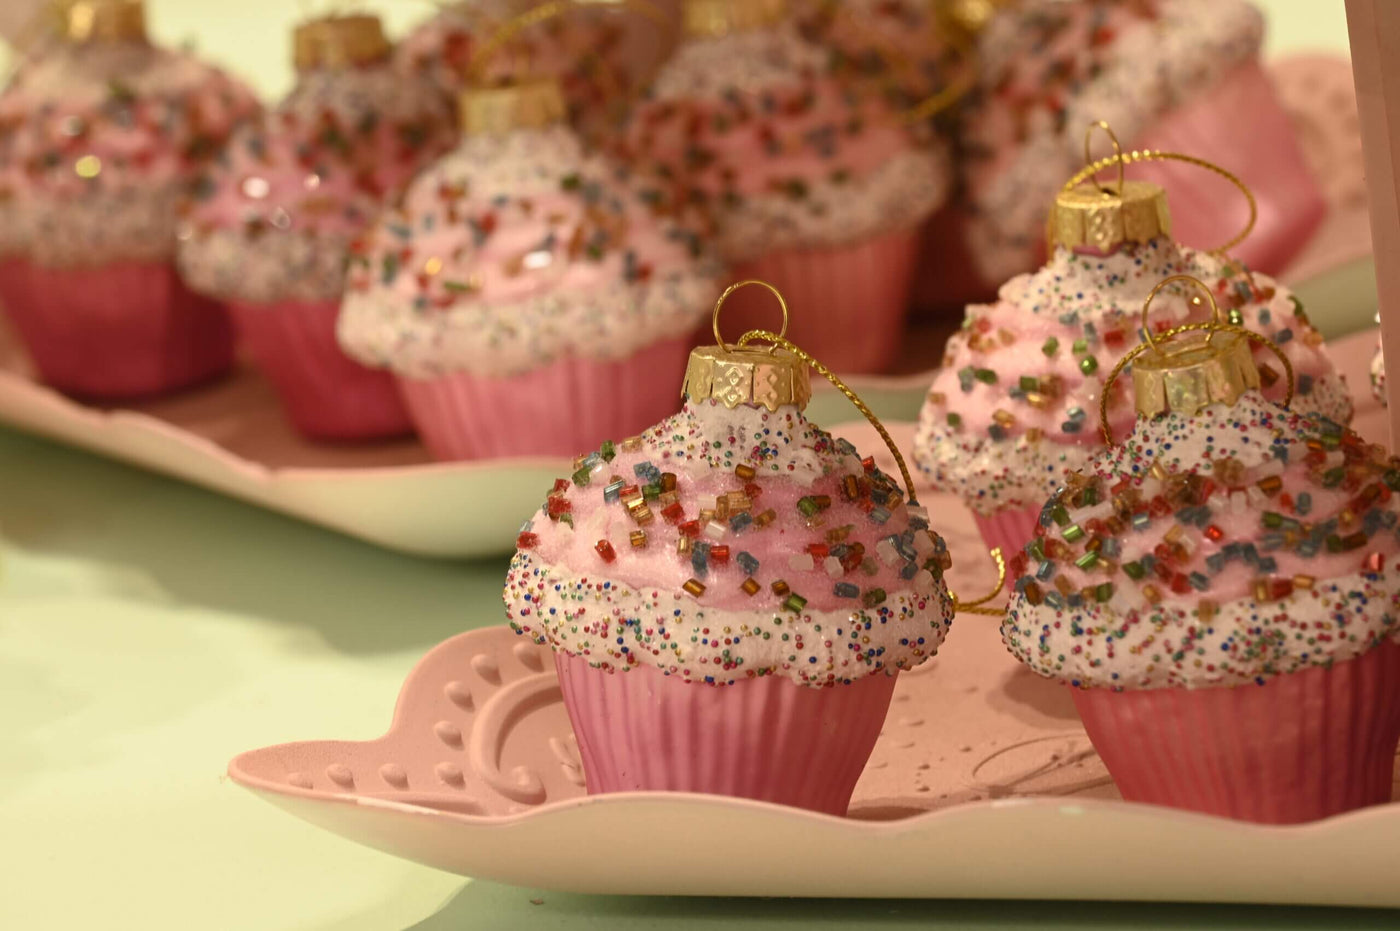 Pink cupcake Christmas tree decorations on plate